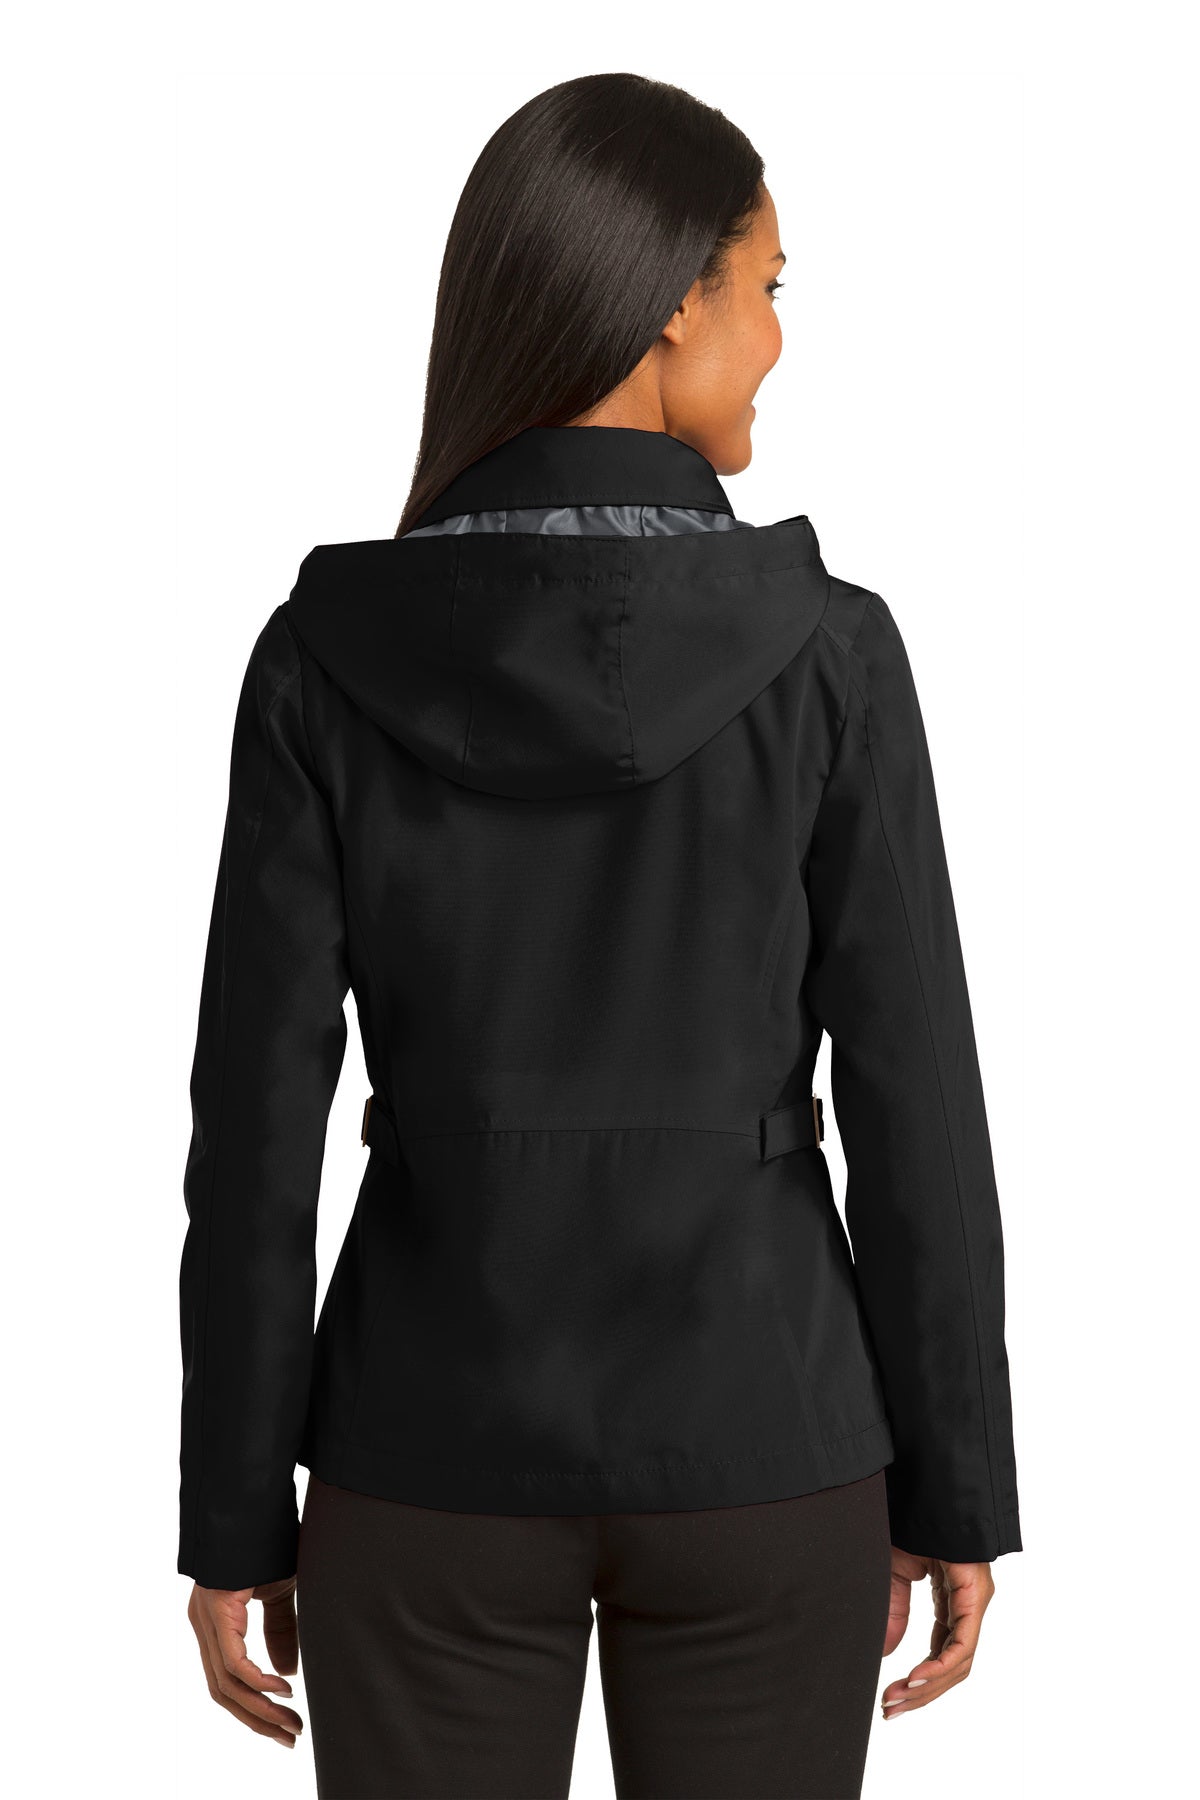 Port Authority® Ladies Legacy™ Jacket L764  ONLY ONE AVAILABLE  Discontinued Product